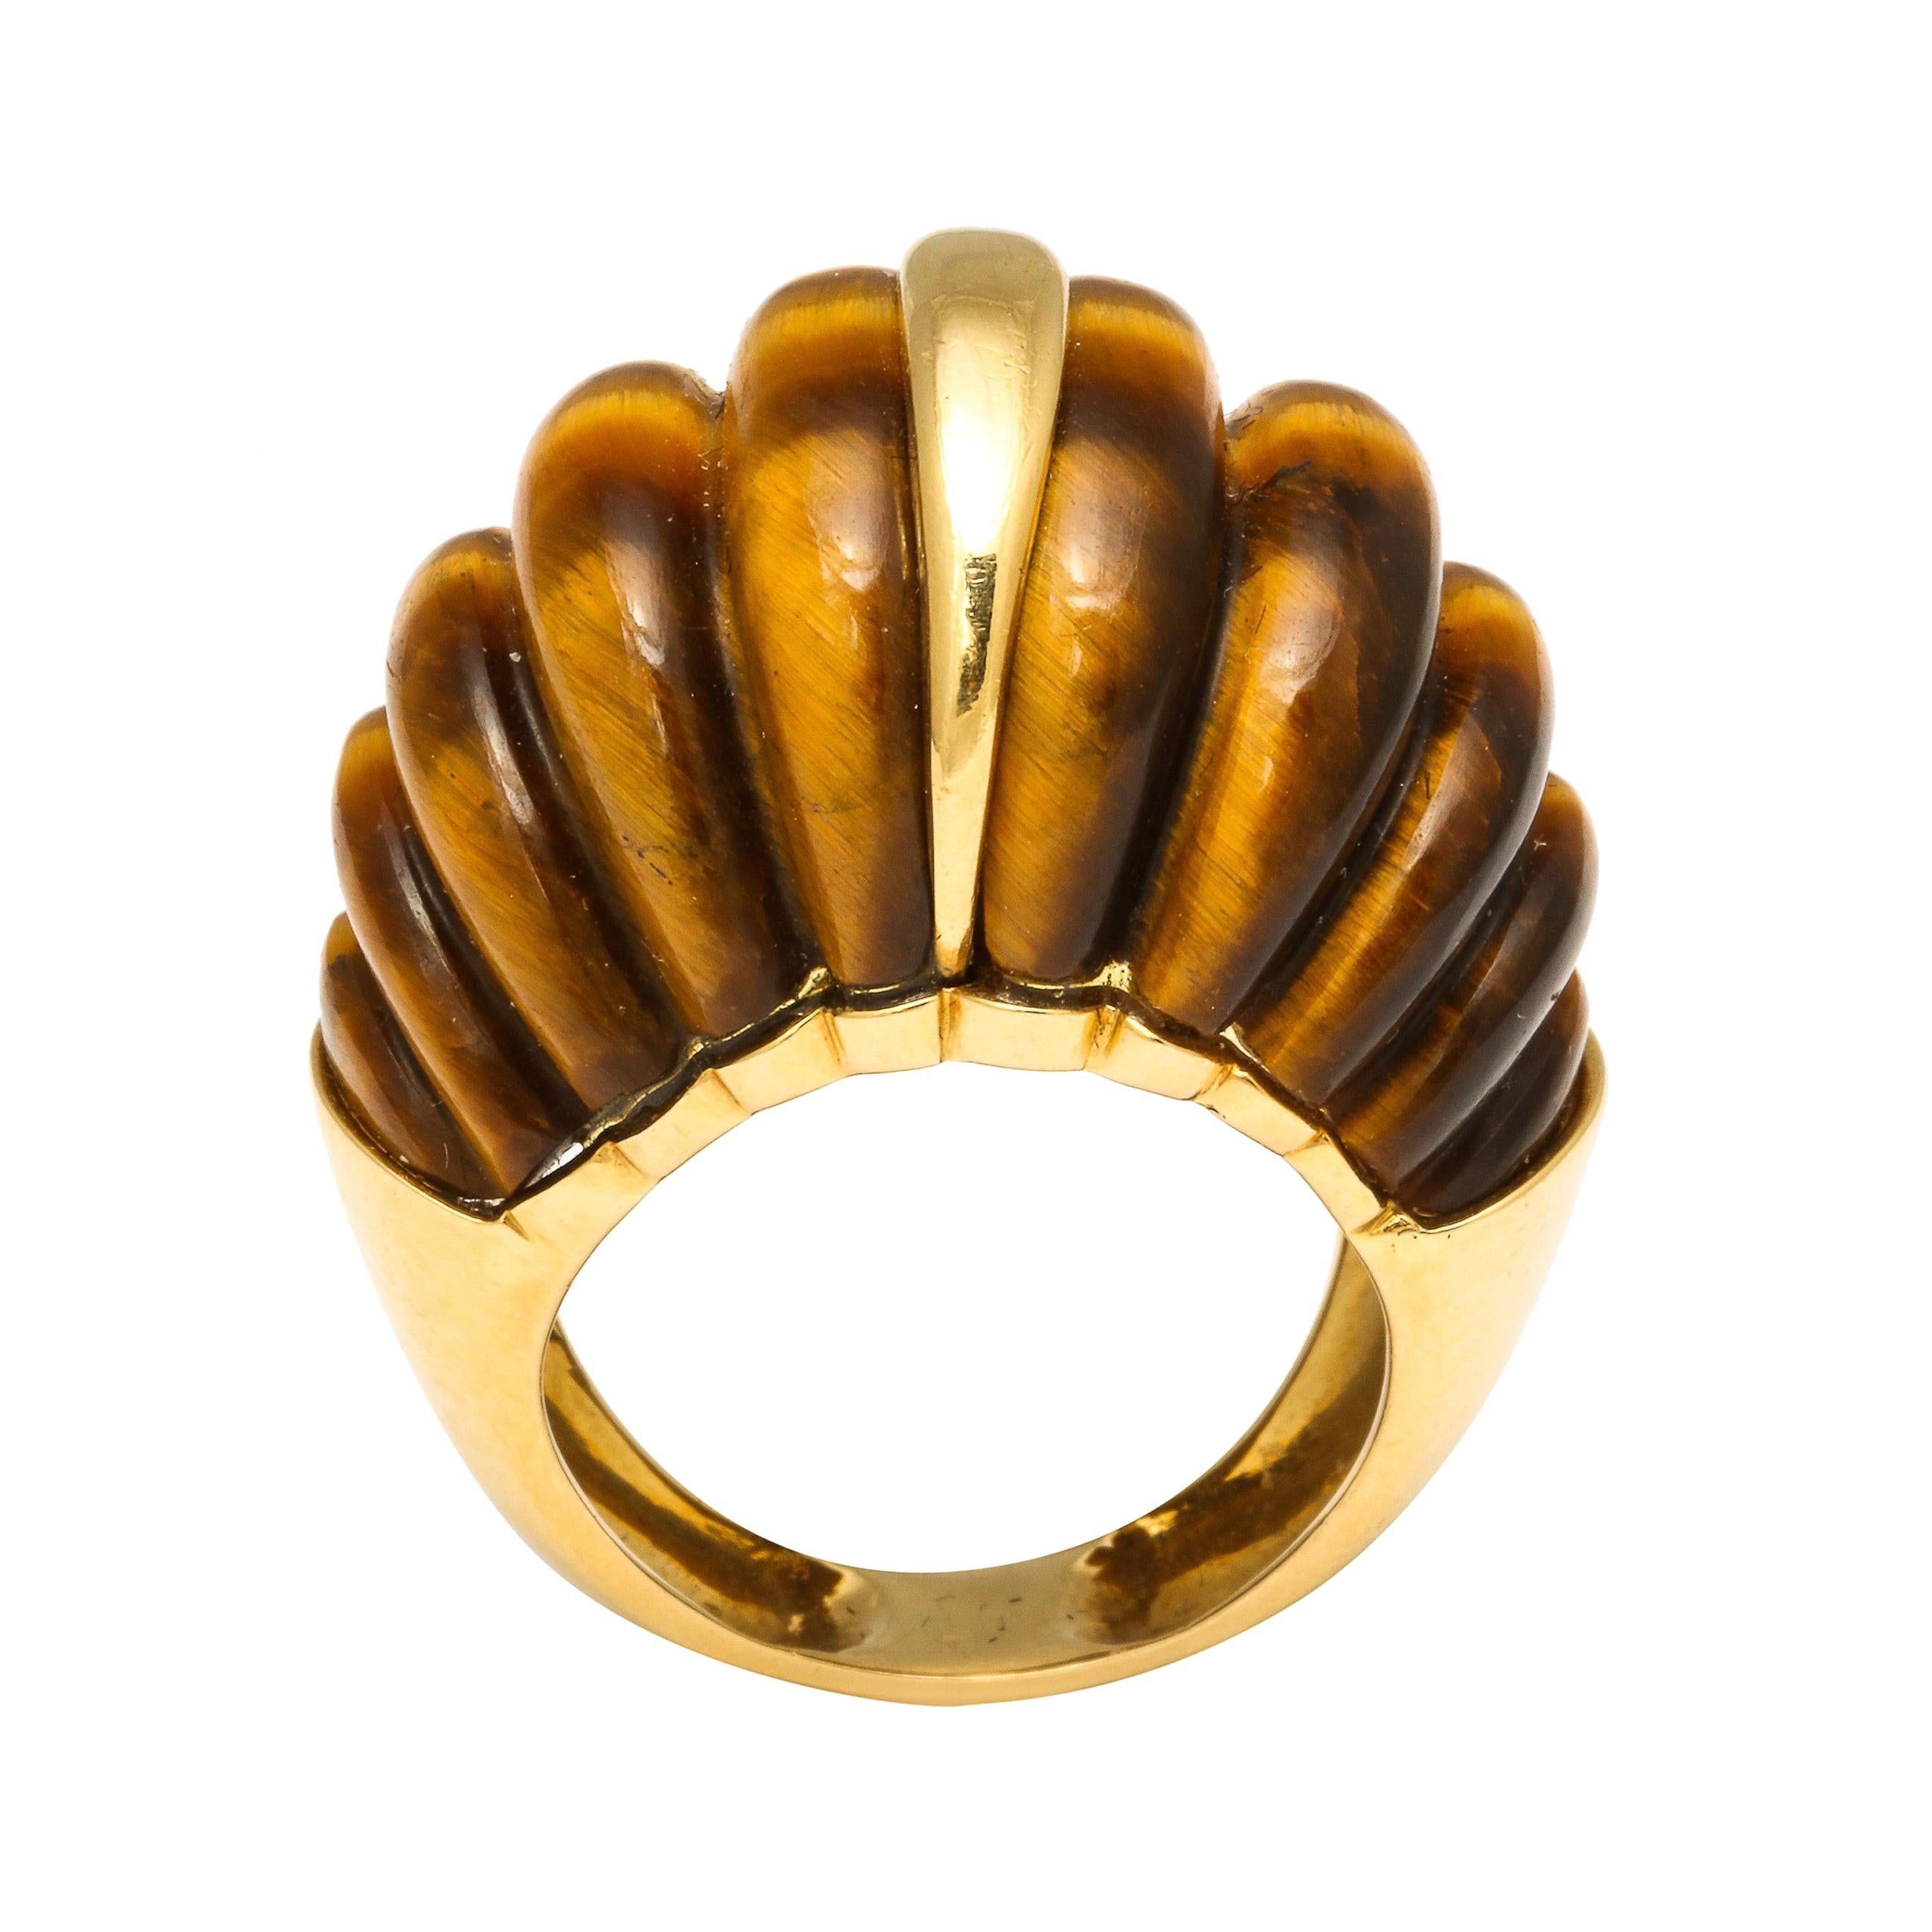 Tiger's Eye Melon Shaped Ring with Center Gold Bar For Sale